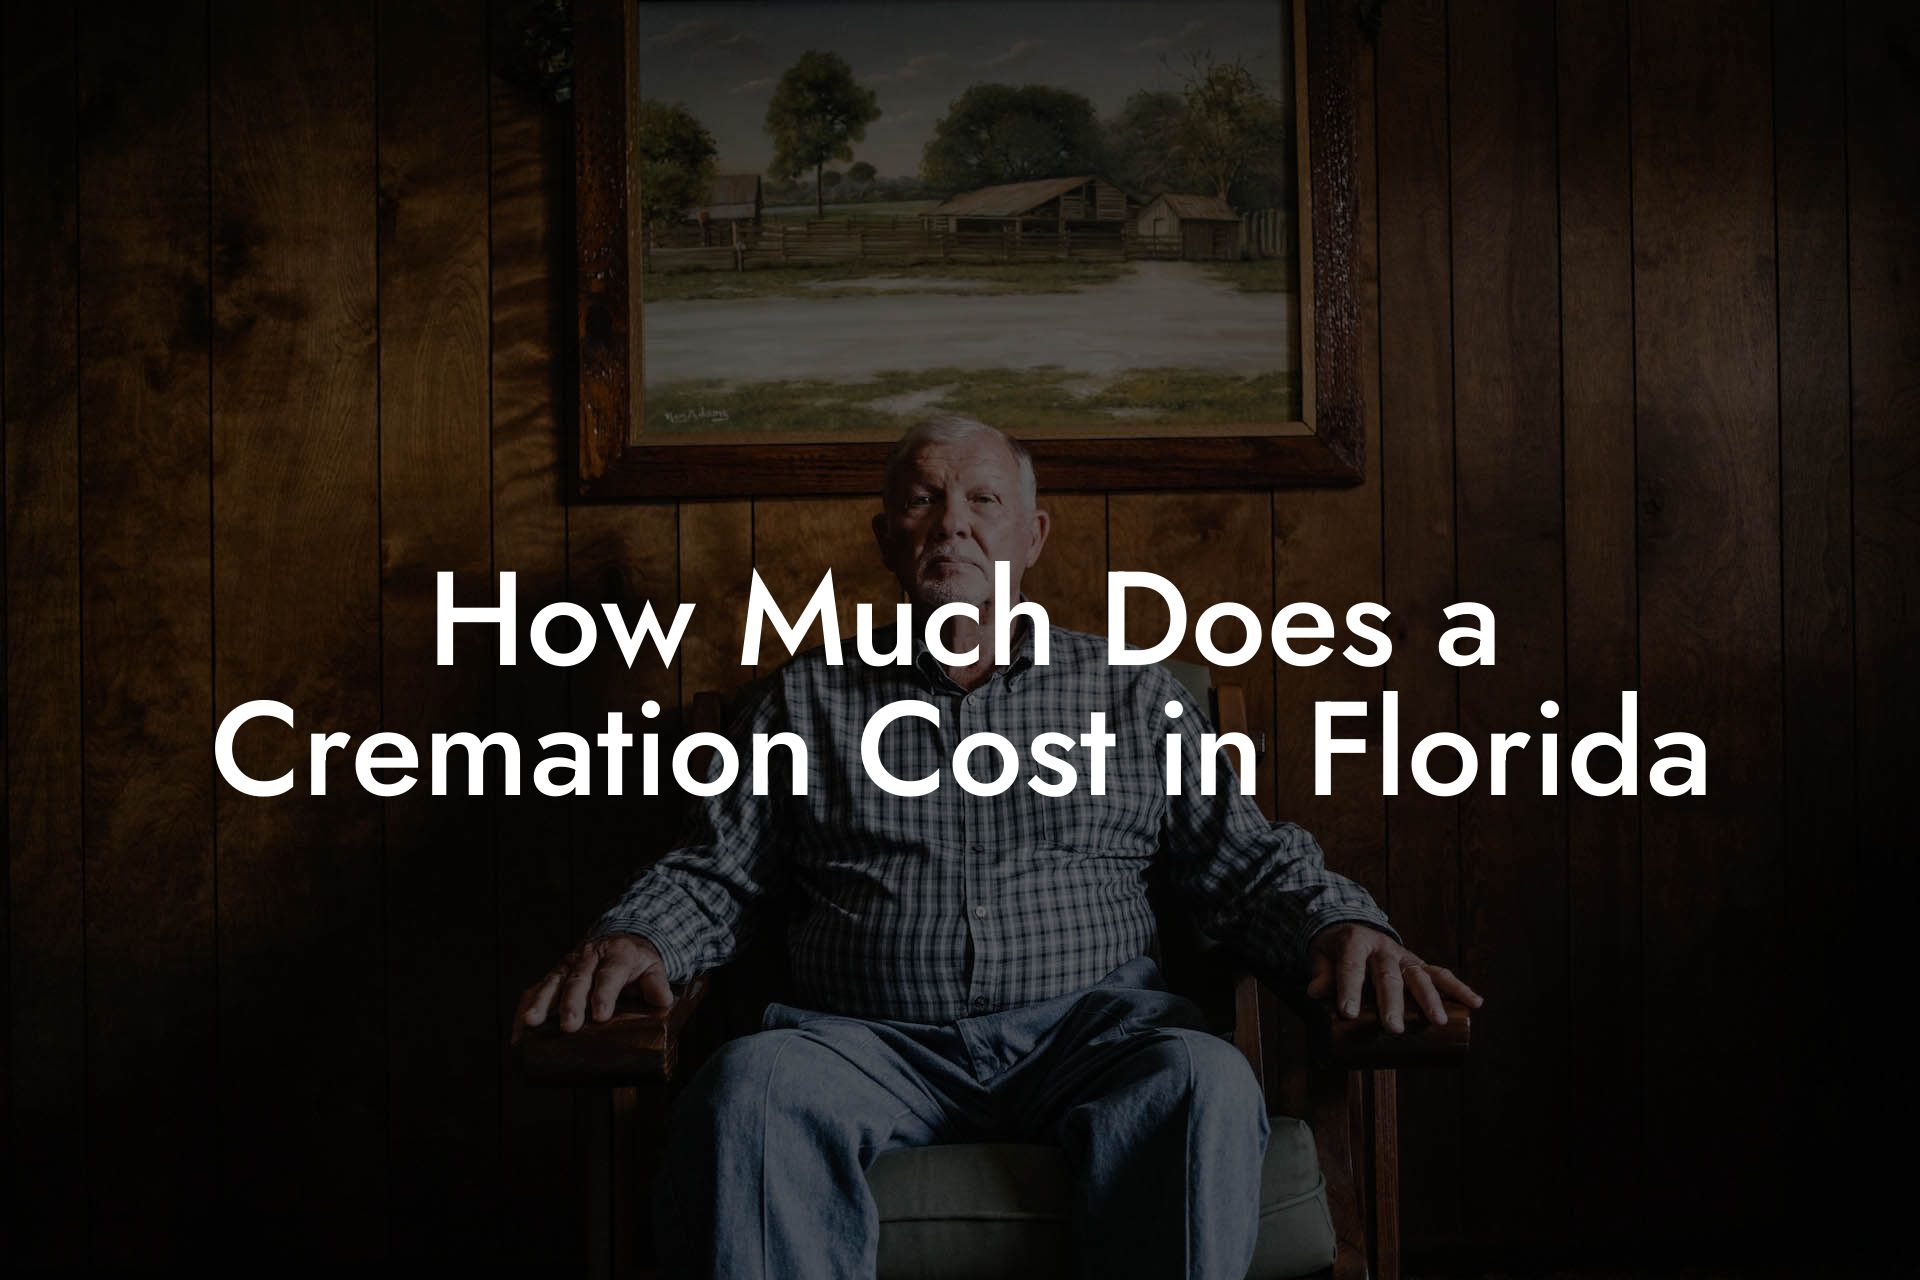 How Much Does a Cremation Cost in Florida